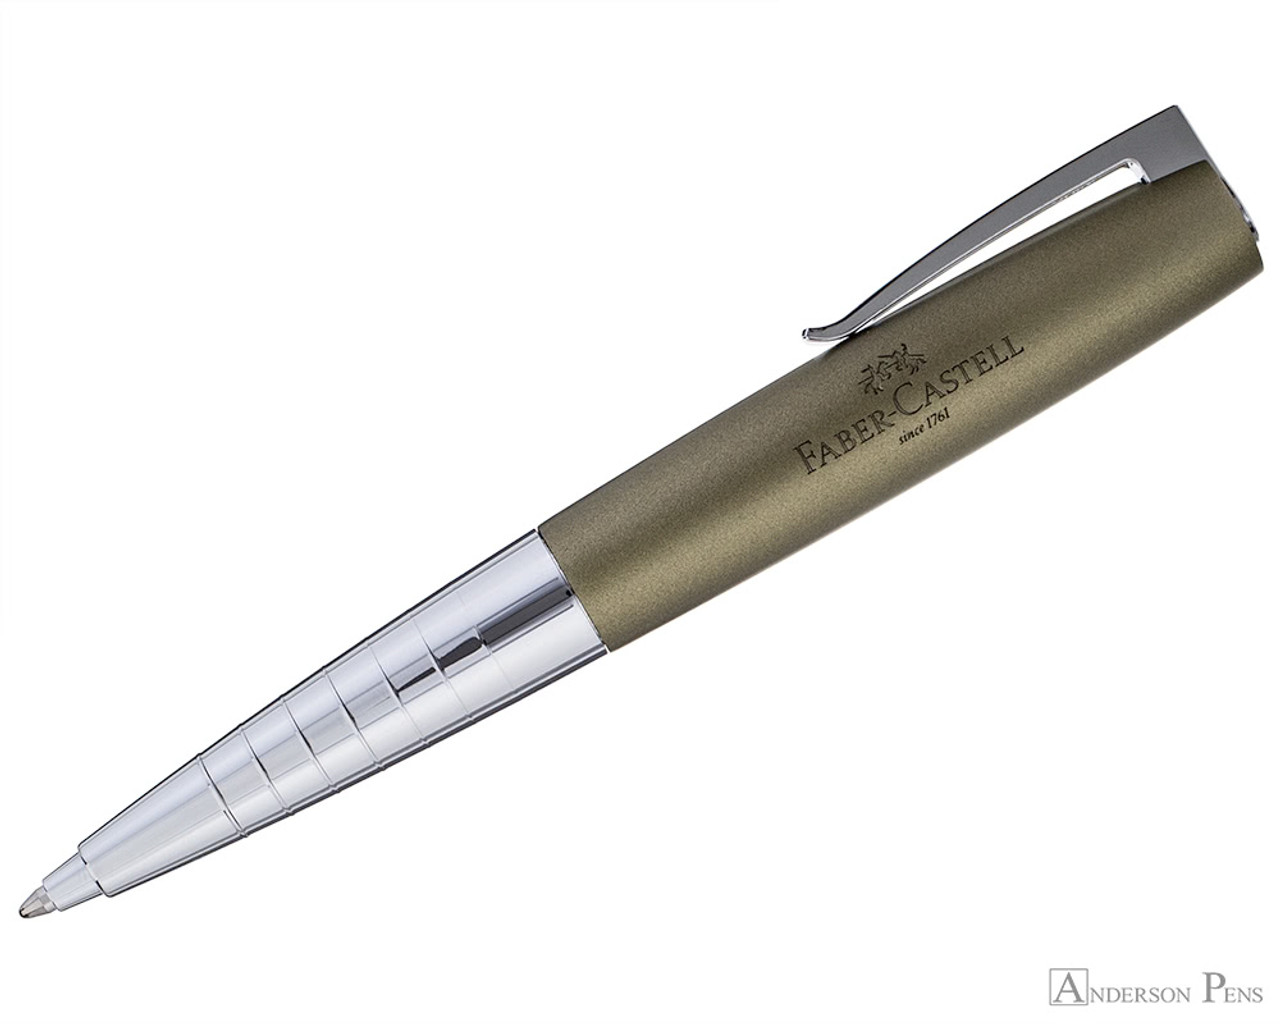 Faber-Castell Loom Ballpoint - Metallic Olive Green - Anderson Pens, Inc.